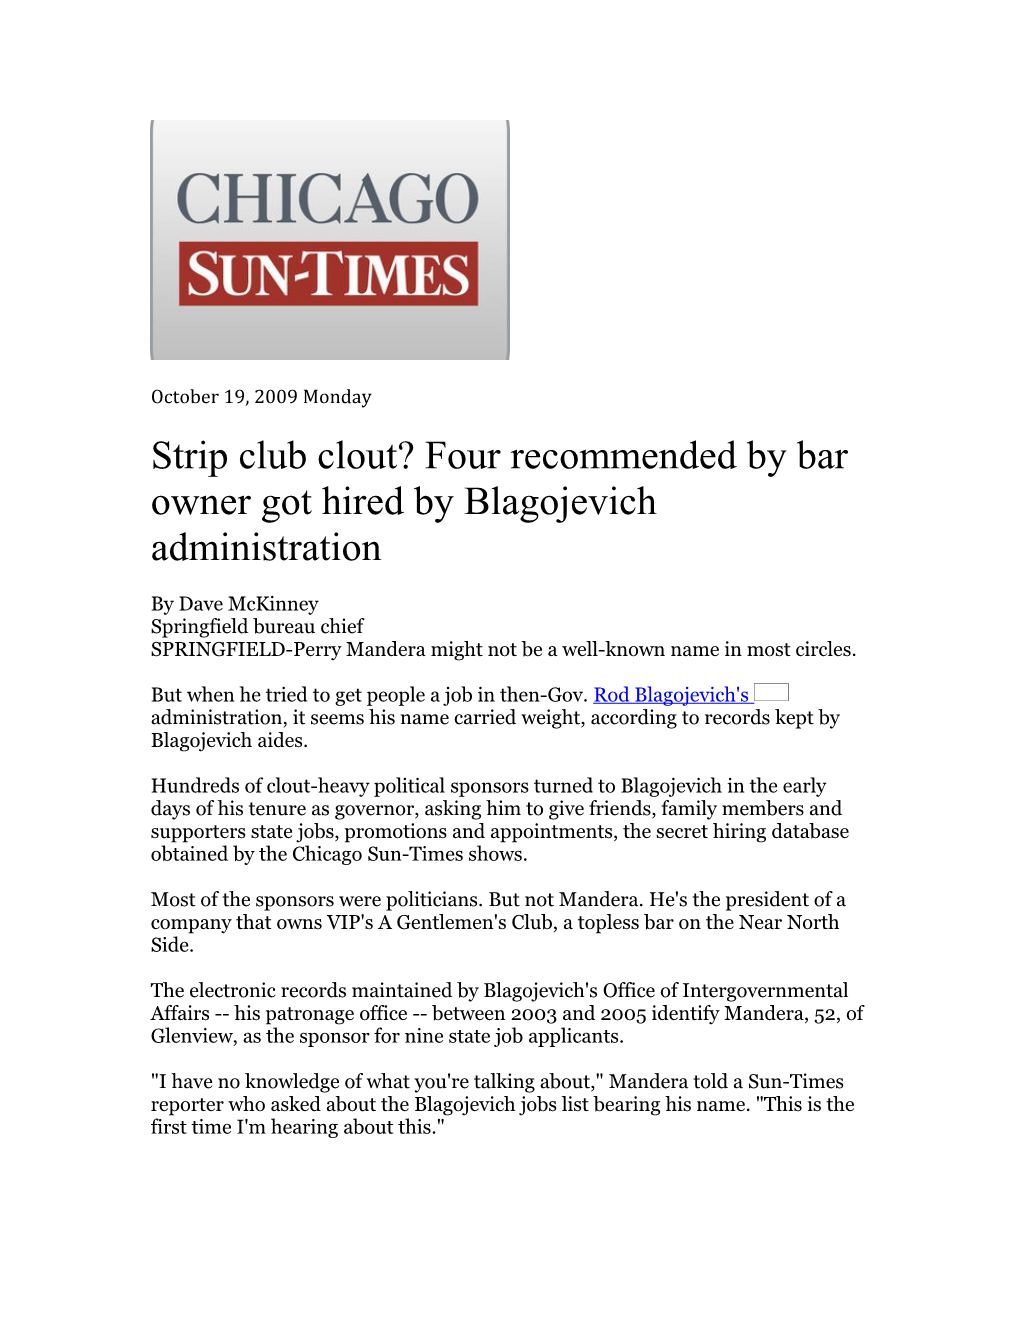 Strip Club Clout? Four Recommended by Bar Owner Got Hired by Blagojevich Administration